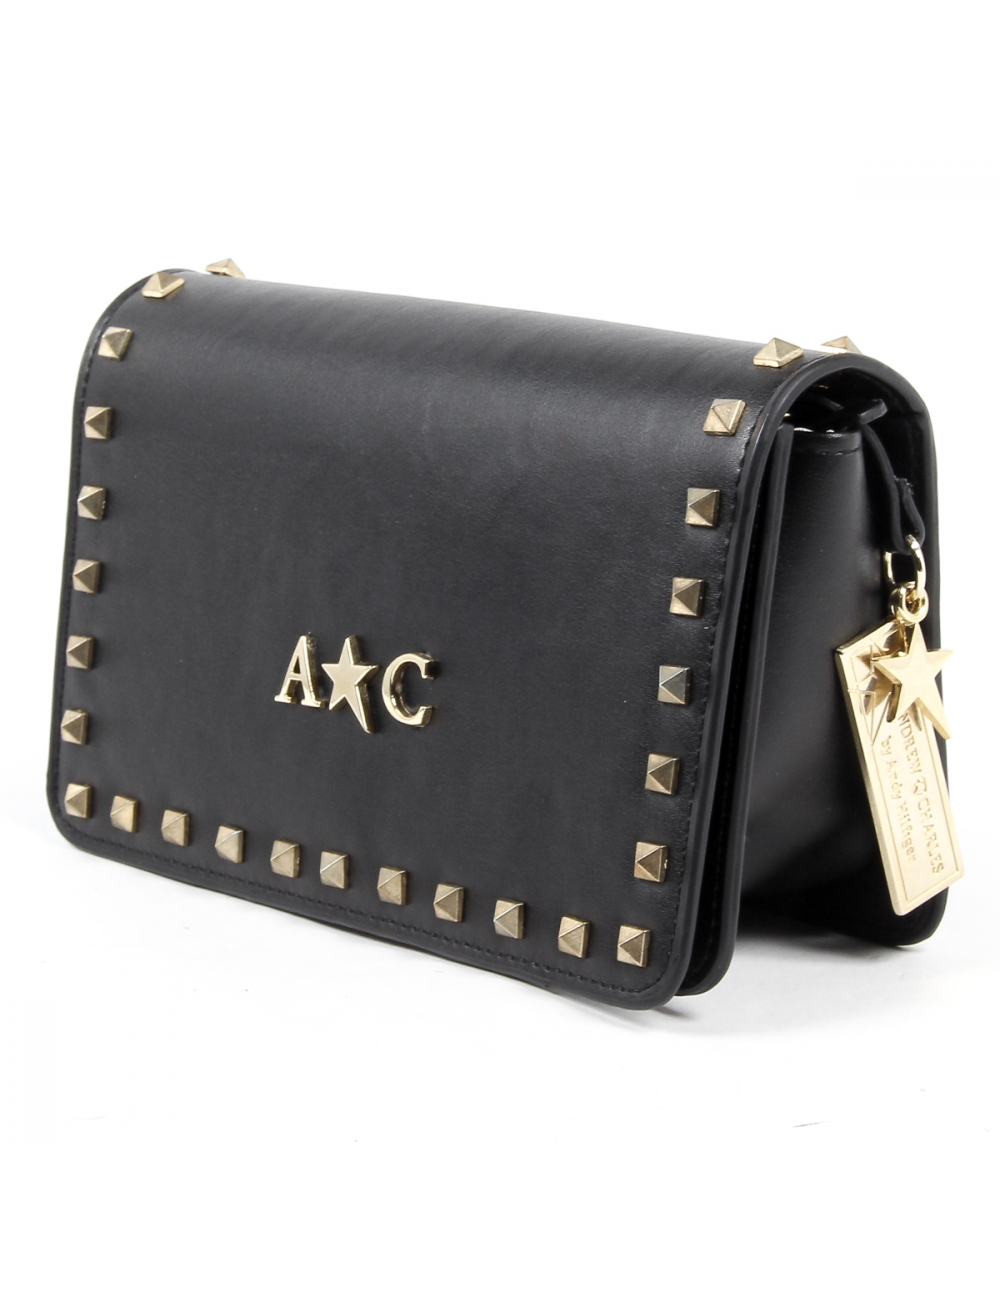 Andrew Charles Womens Handbag Black PAIGE - YuppyCollections